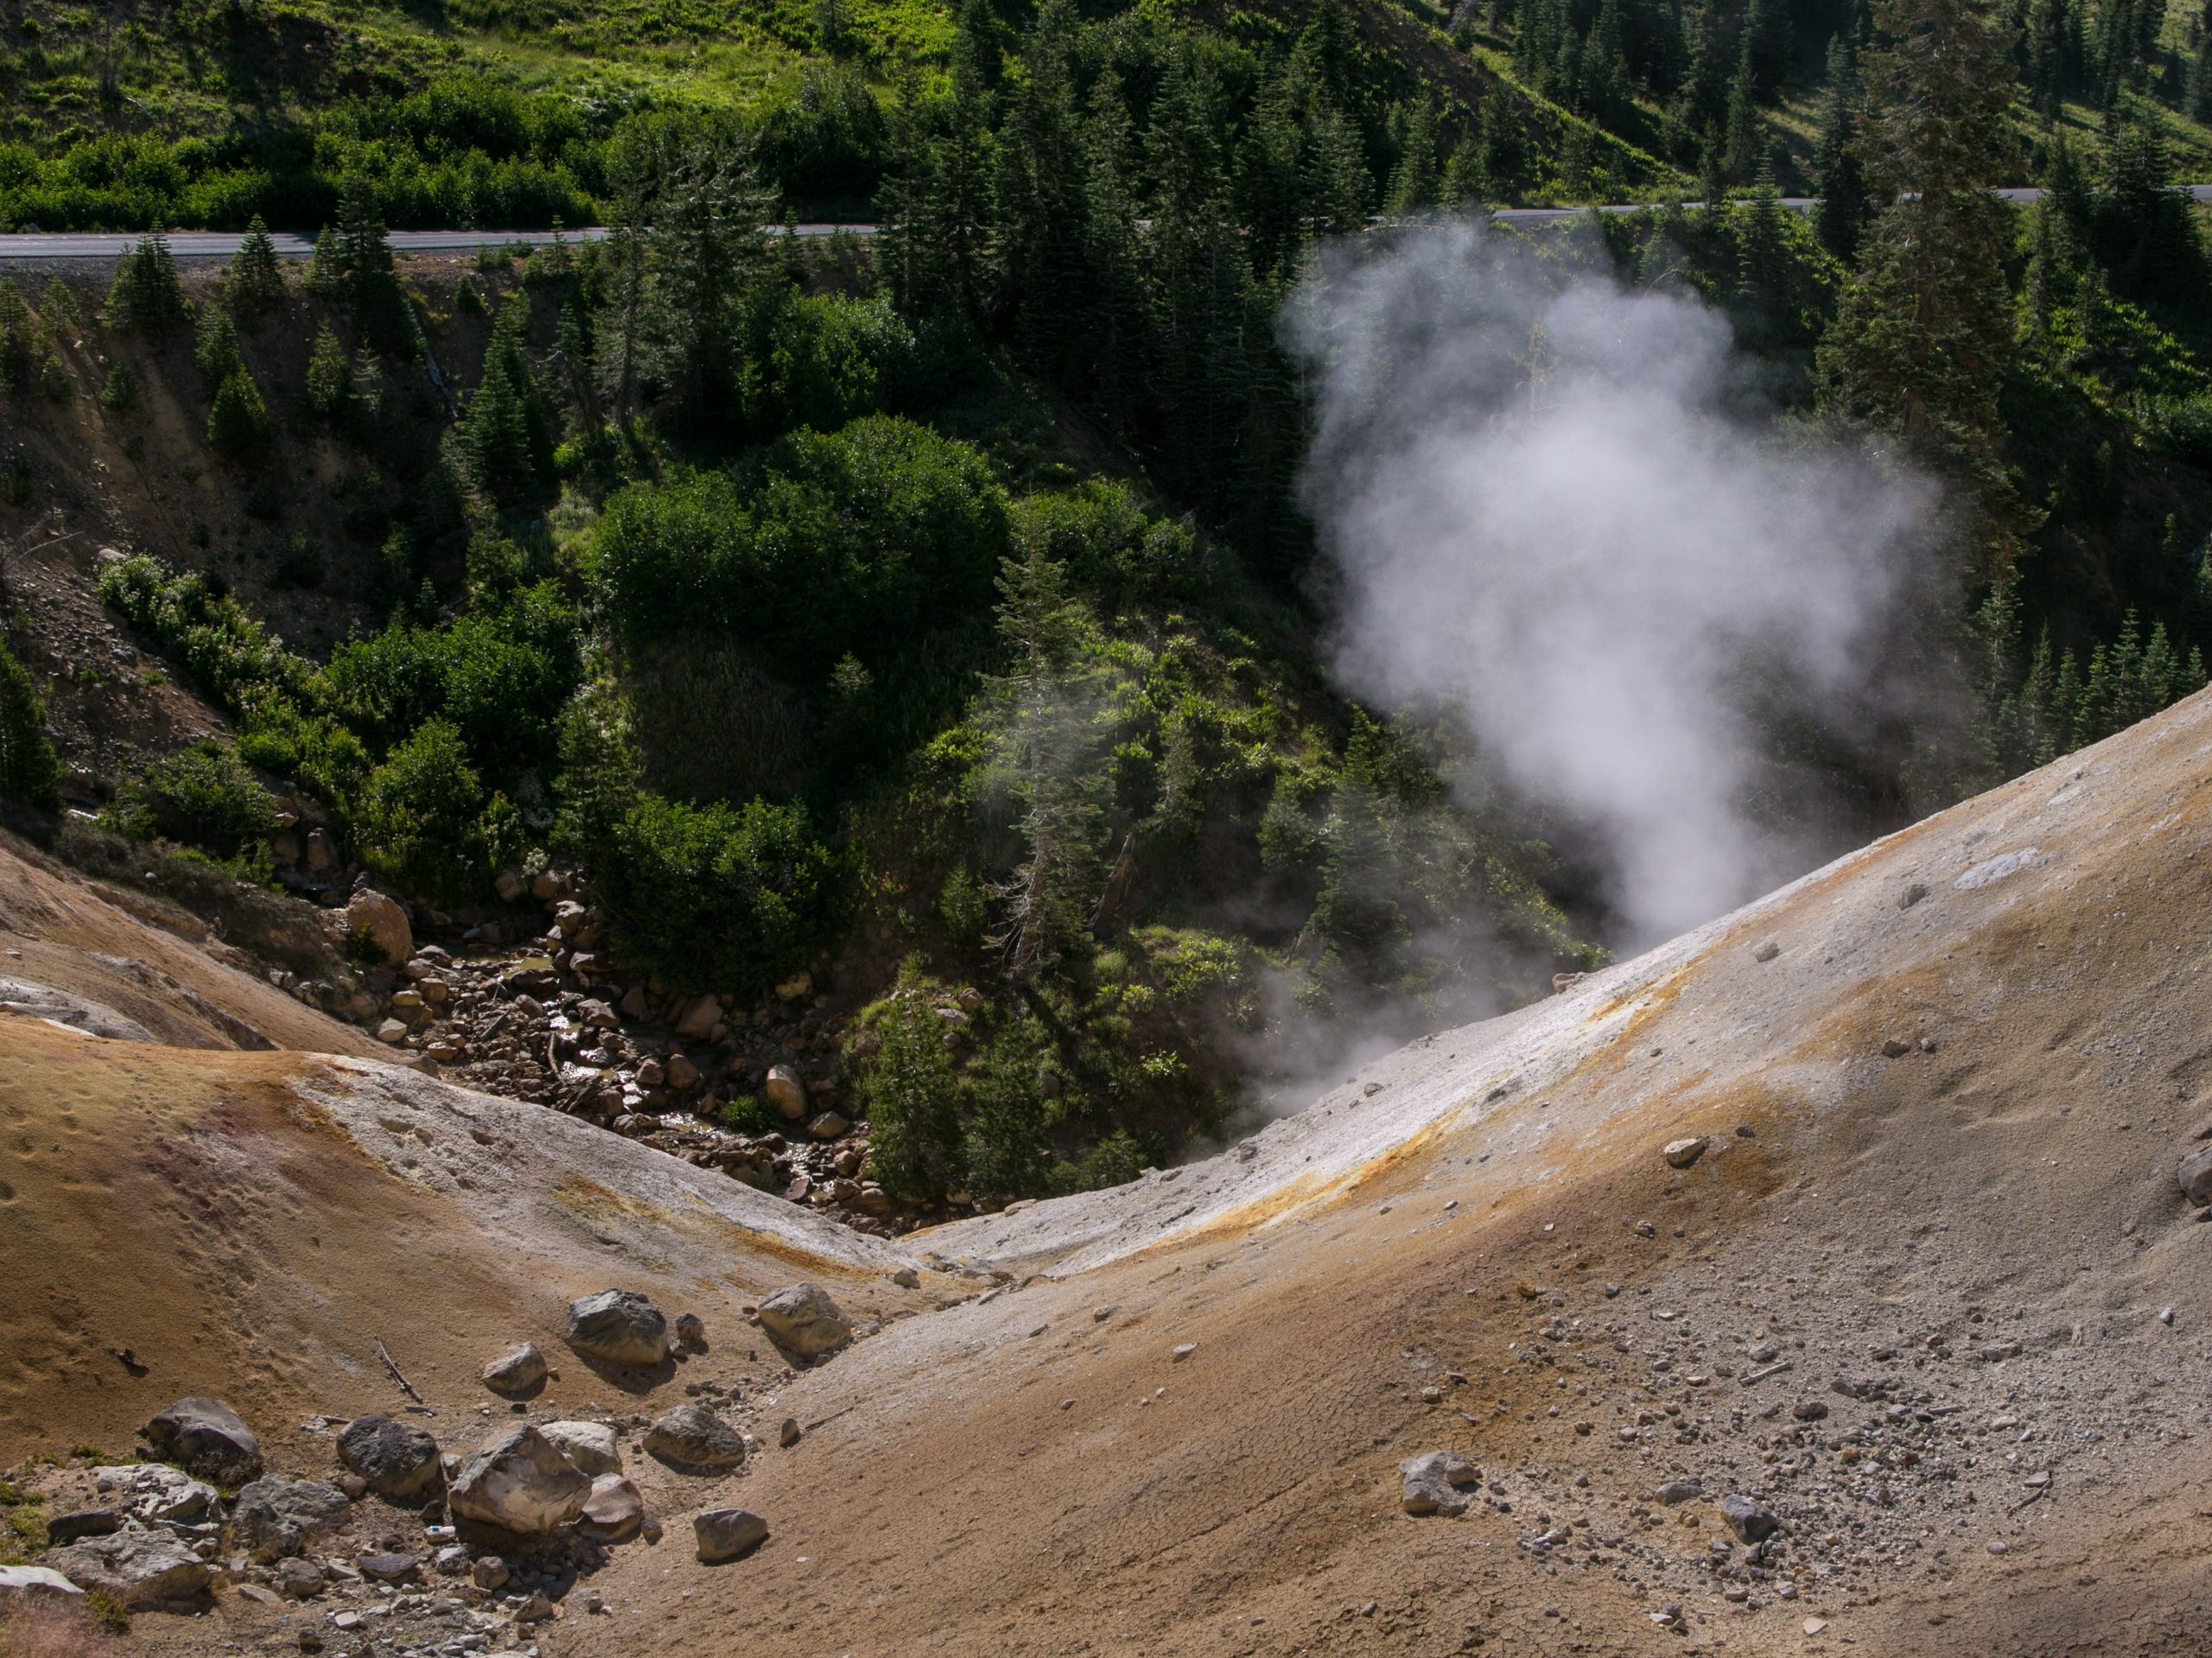 Steam and sulphur rise from a bubbling mudpot on the slopes of Mt. Lassen with trees in the background.